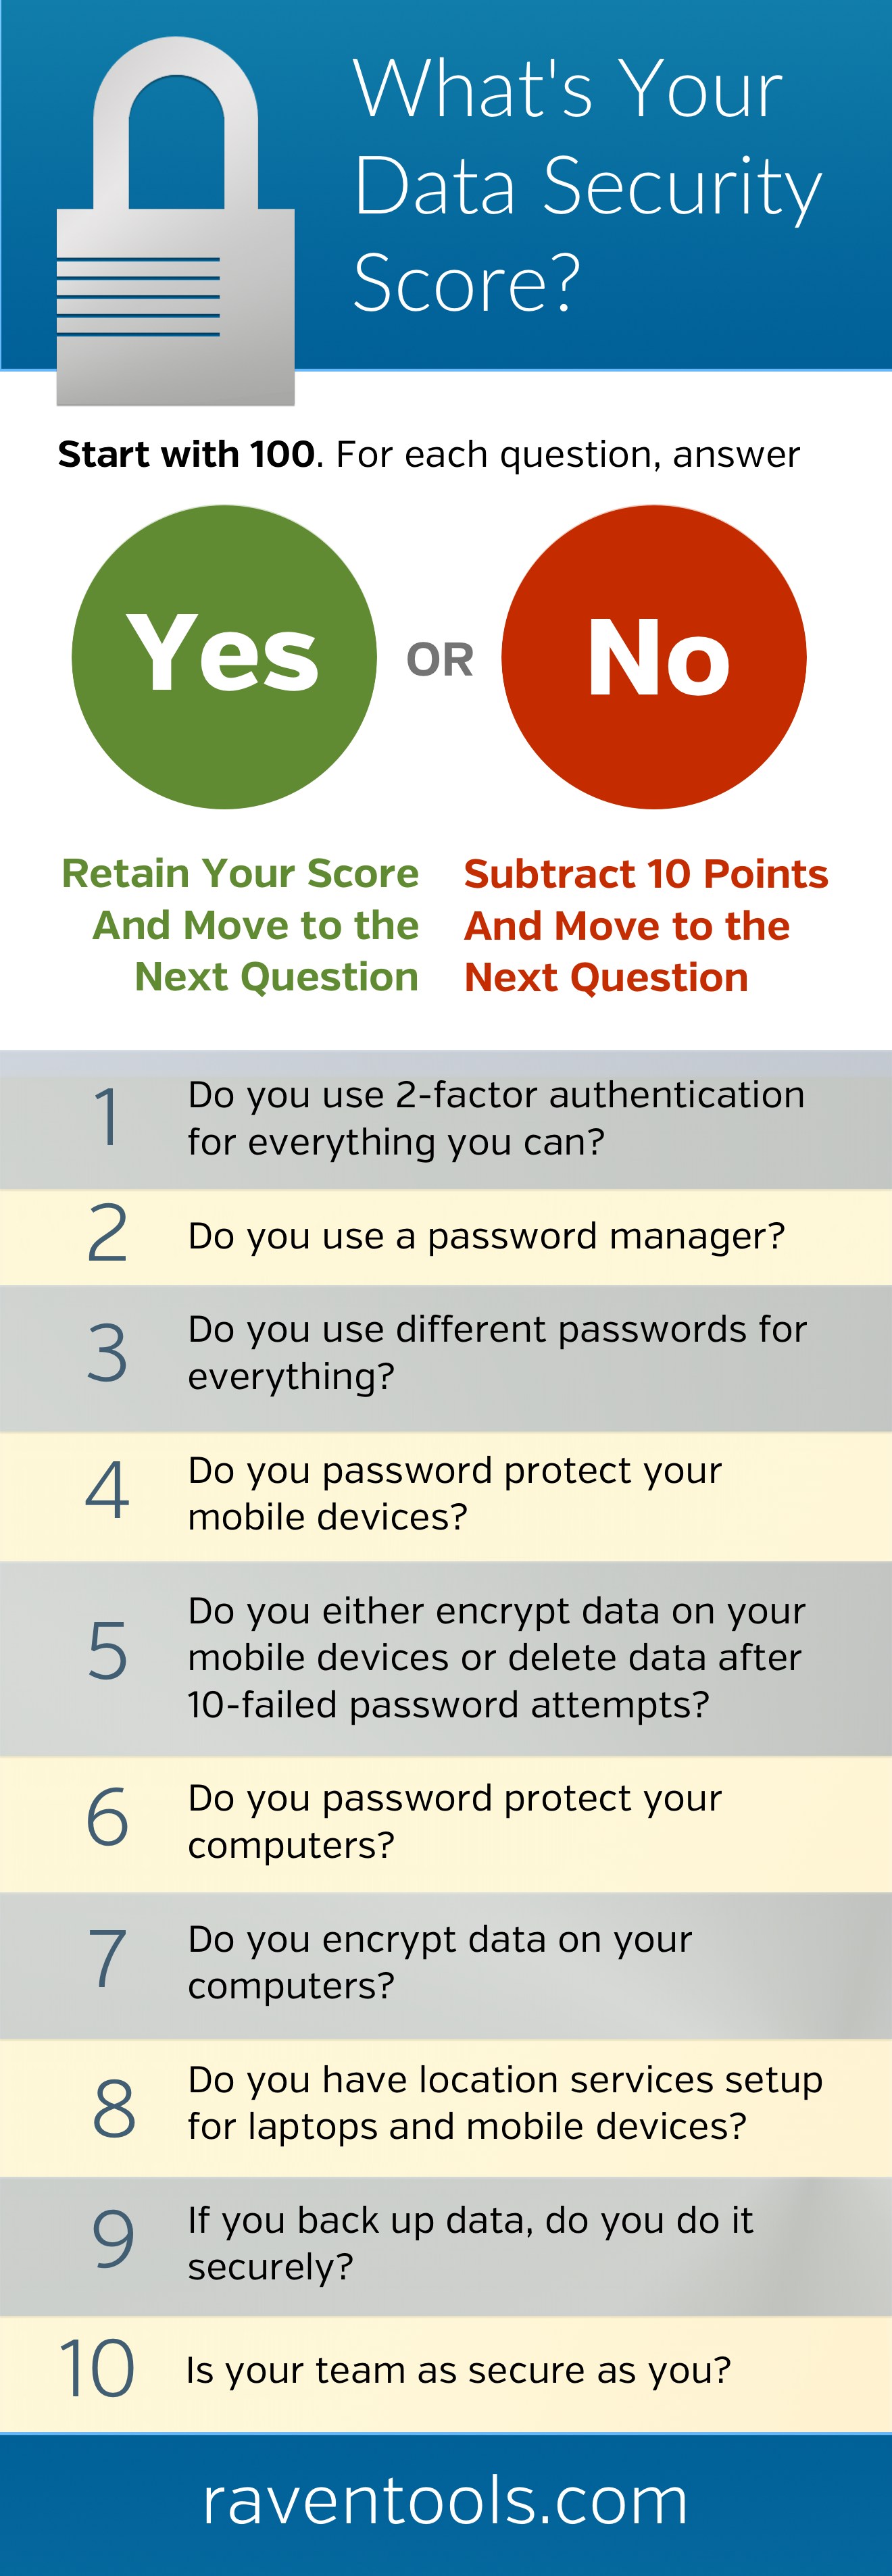 Data Security Score for You and Your Clients